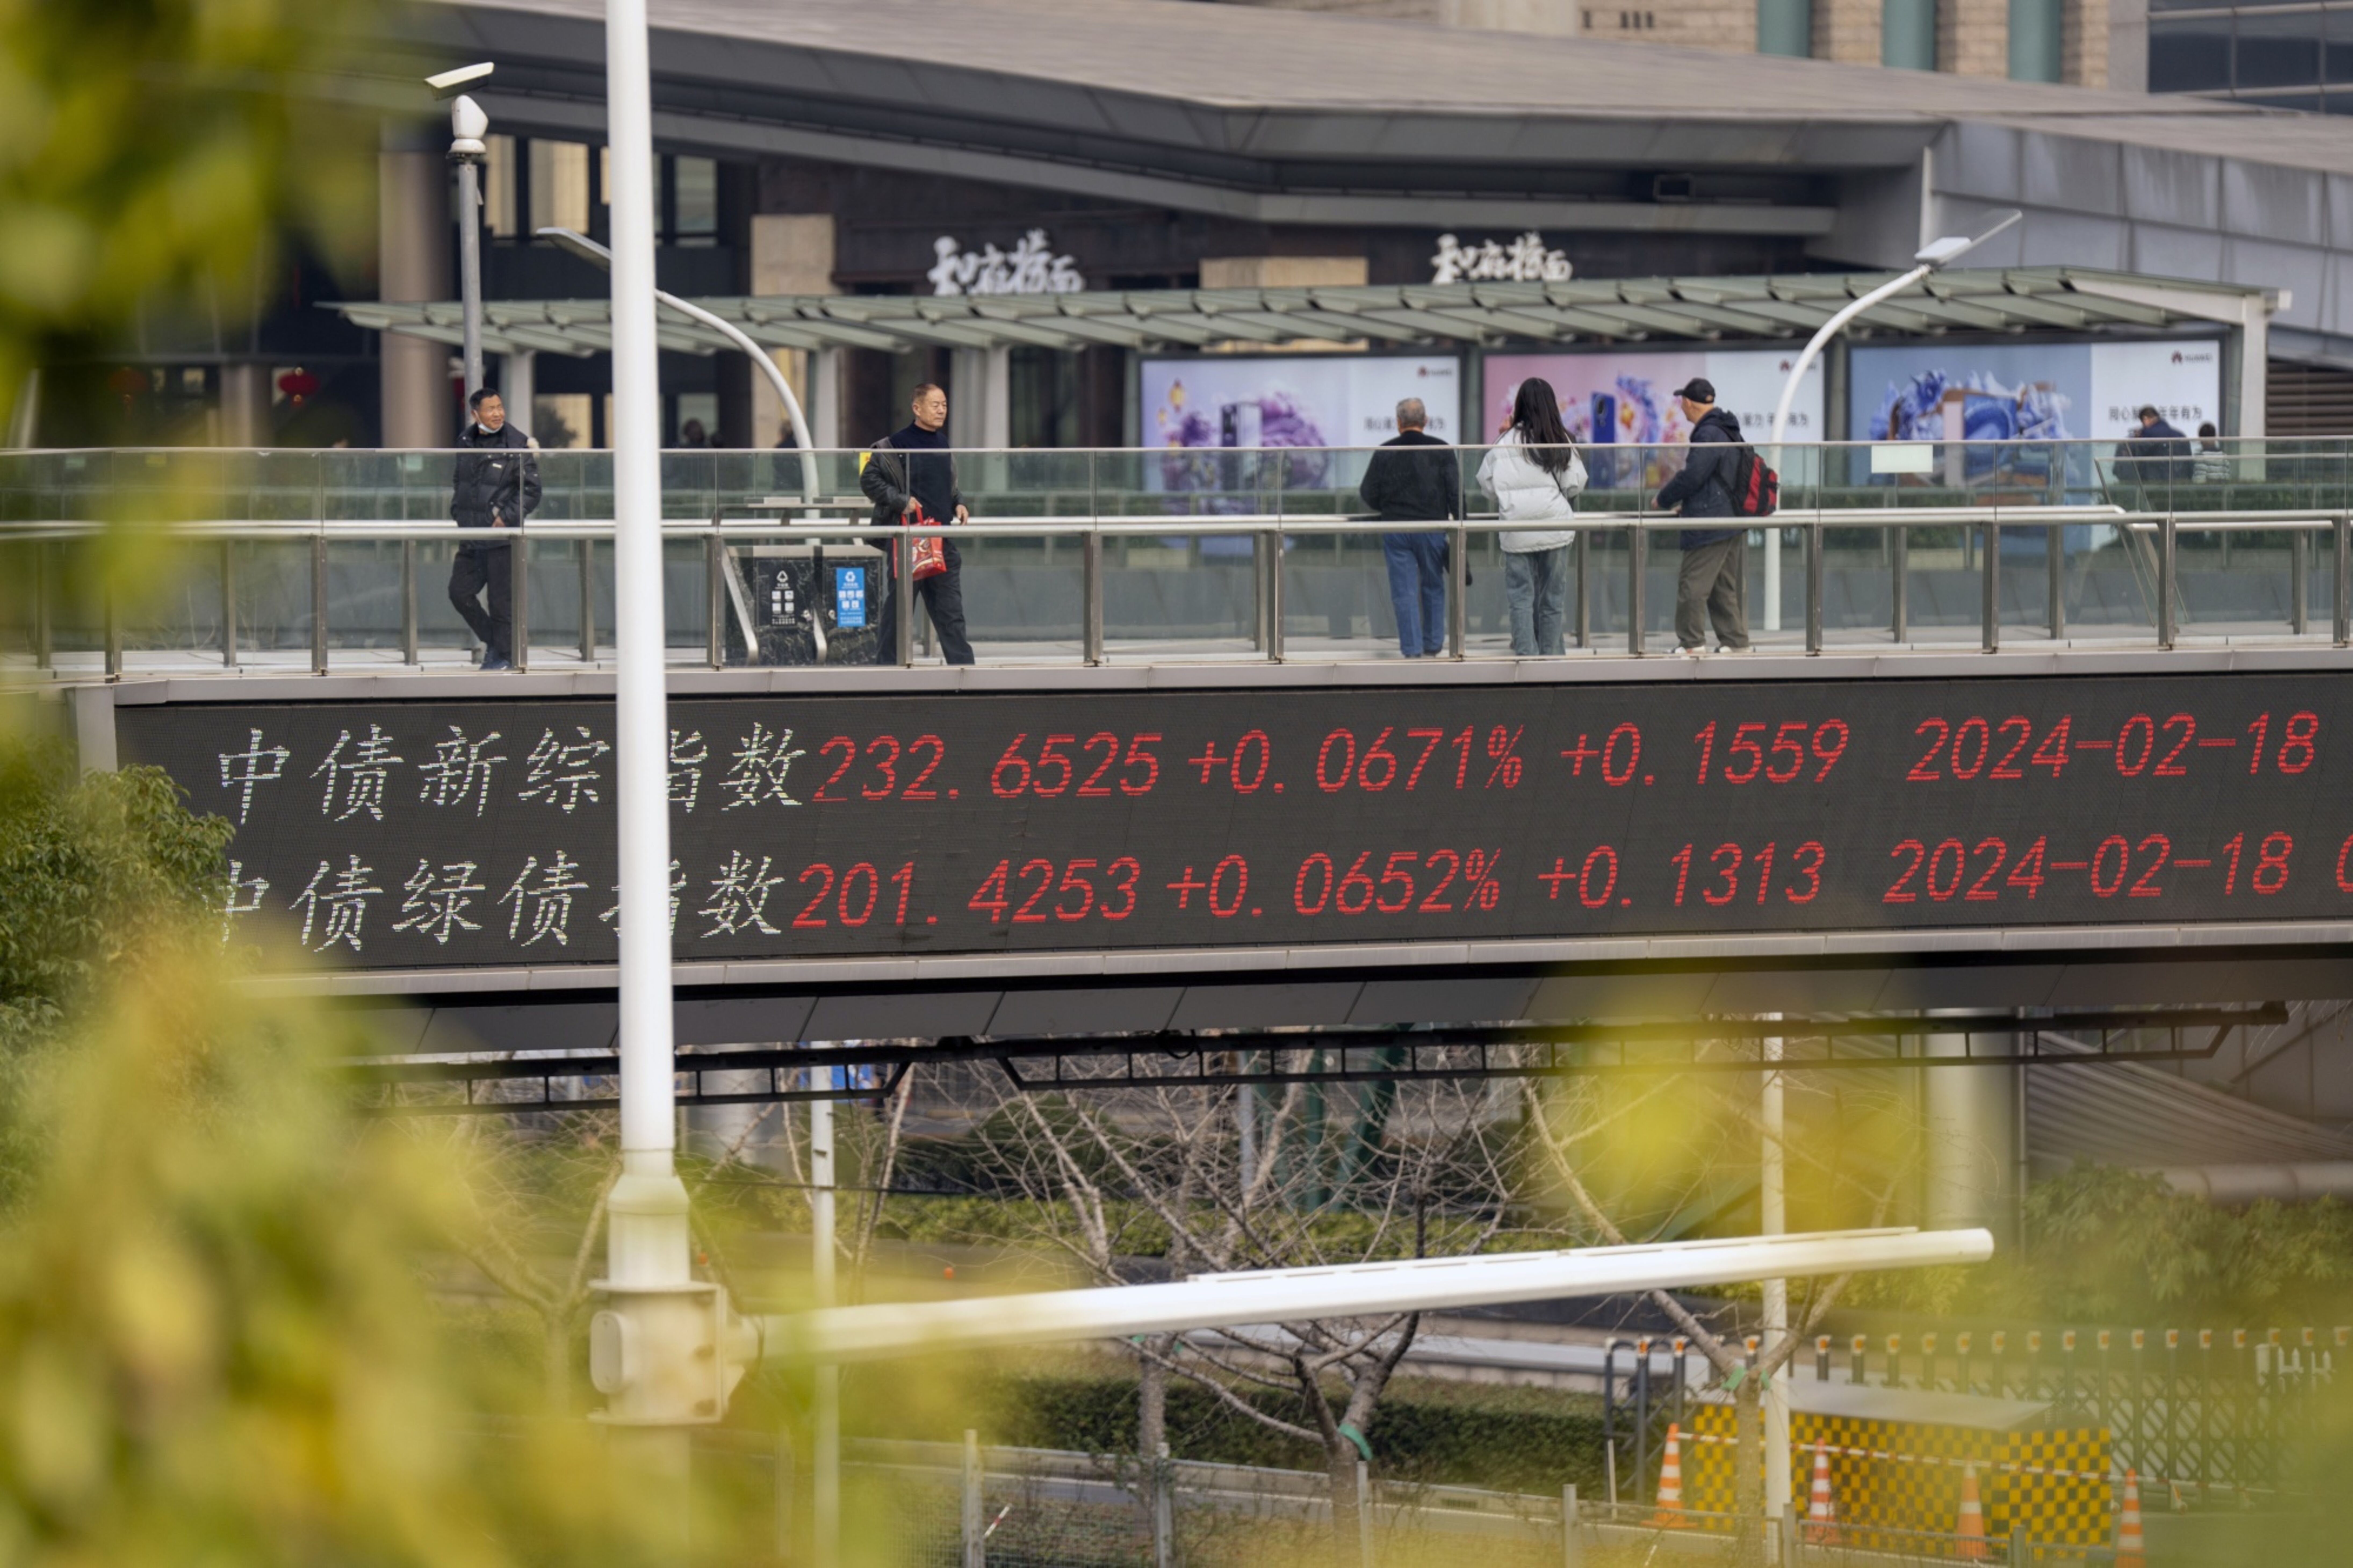 An electronic ticker displays stock figures in Shanghai’s Lujiazui financial district on Feb. 19. Photo: Bloomberg